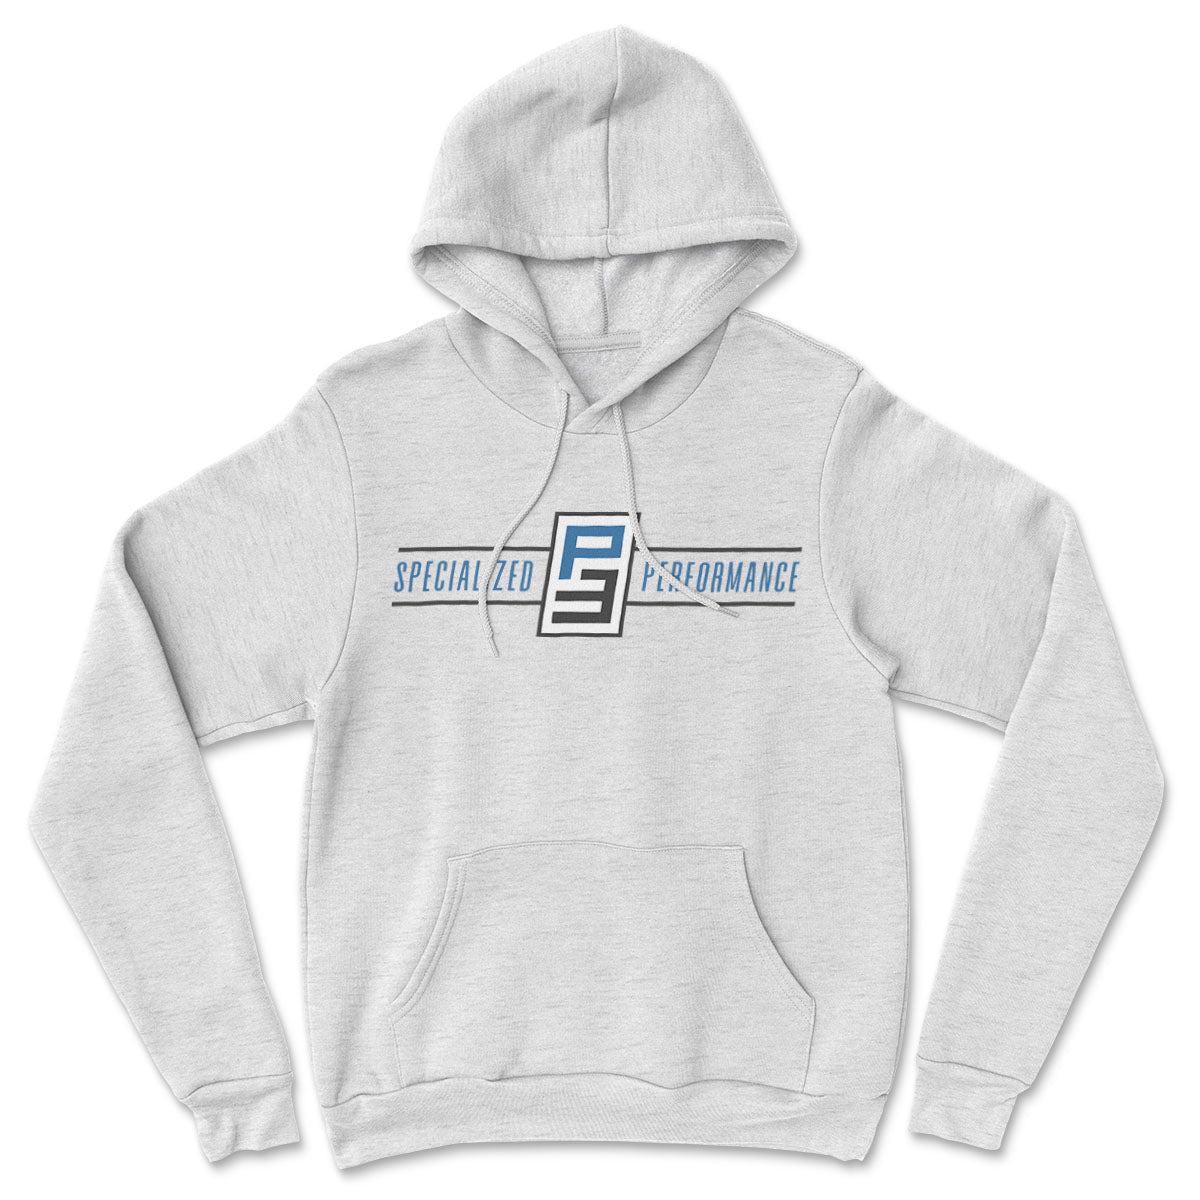 P3 Specialized Performance // Adult Fleece Hoodie